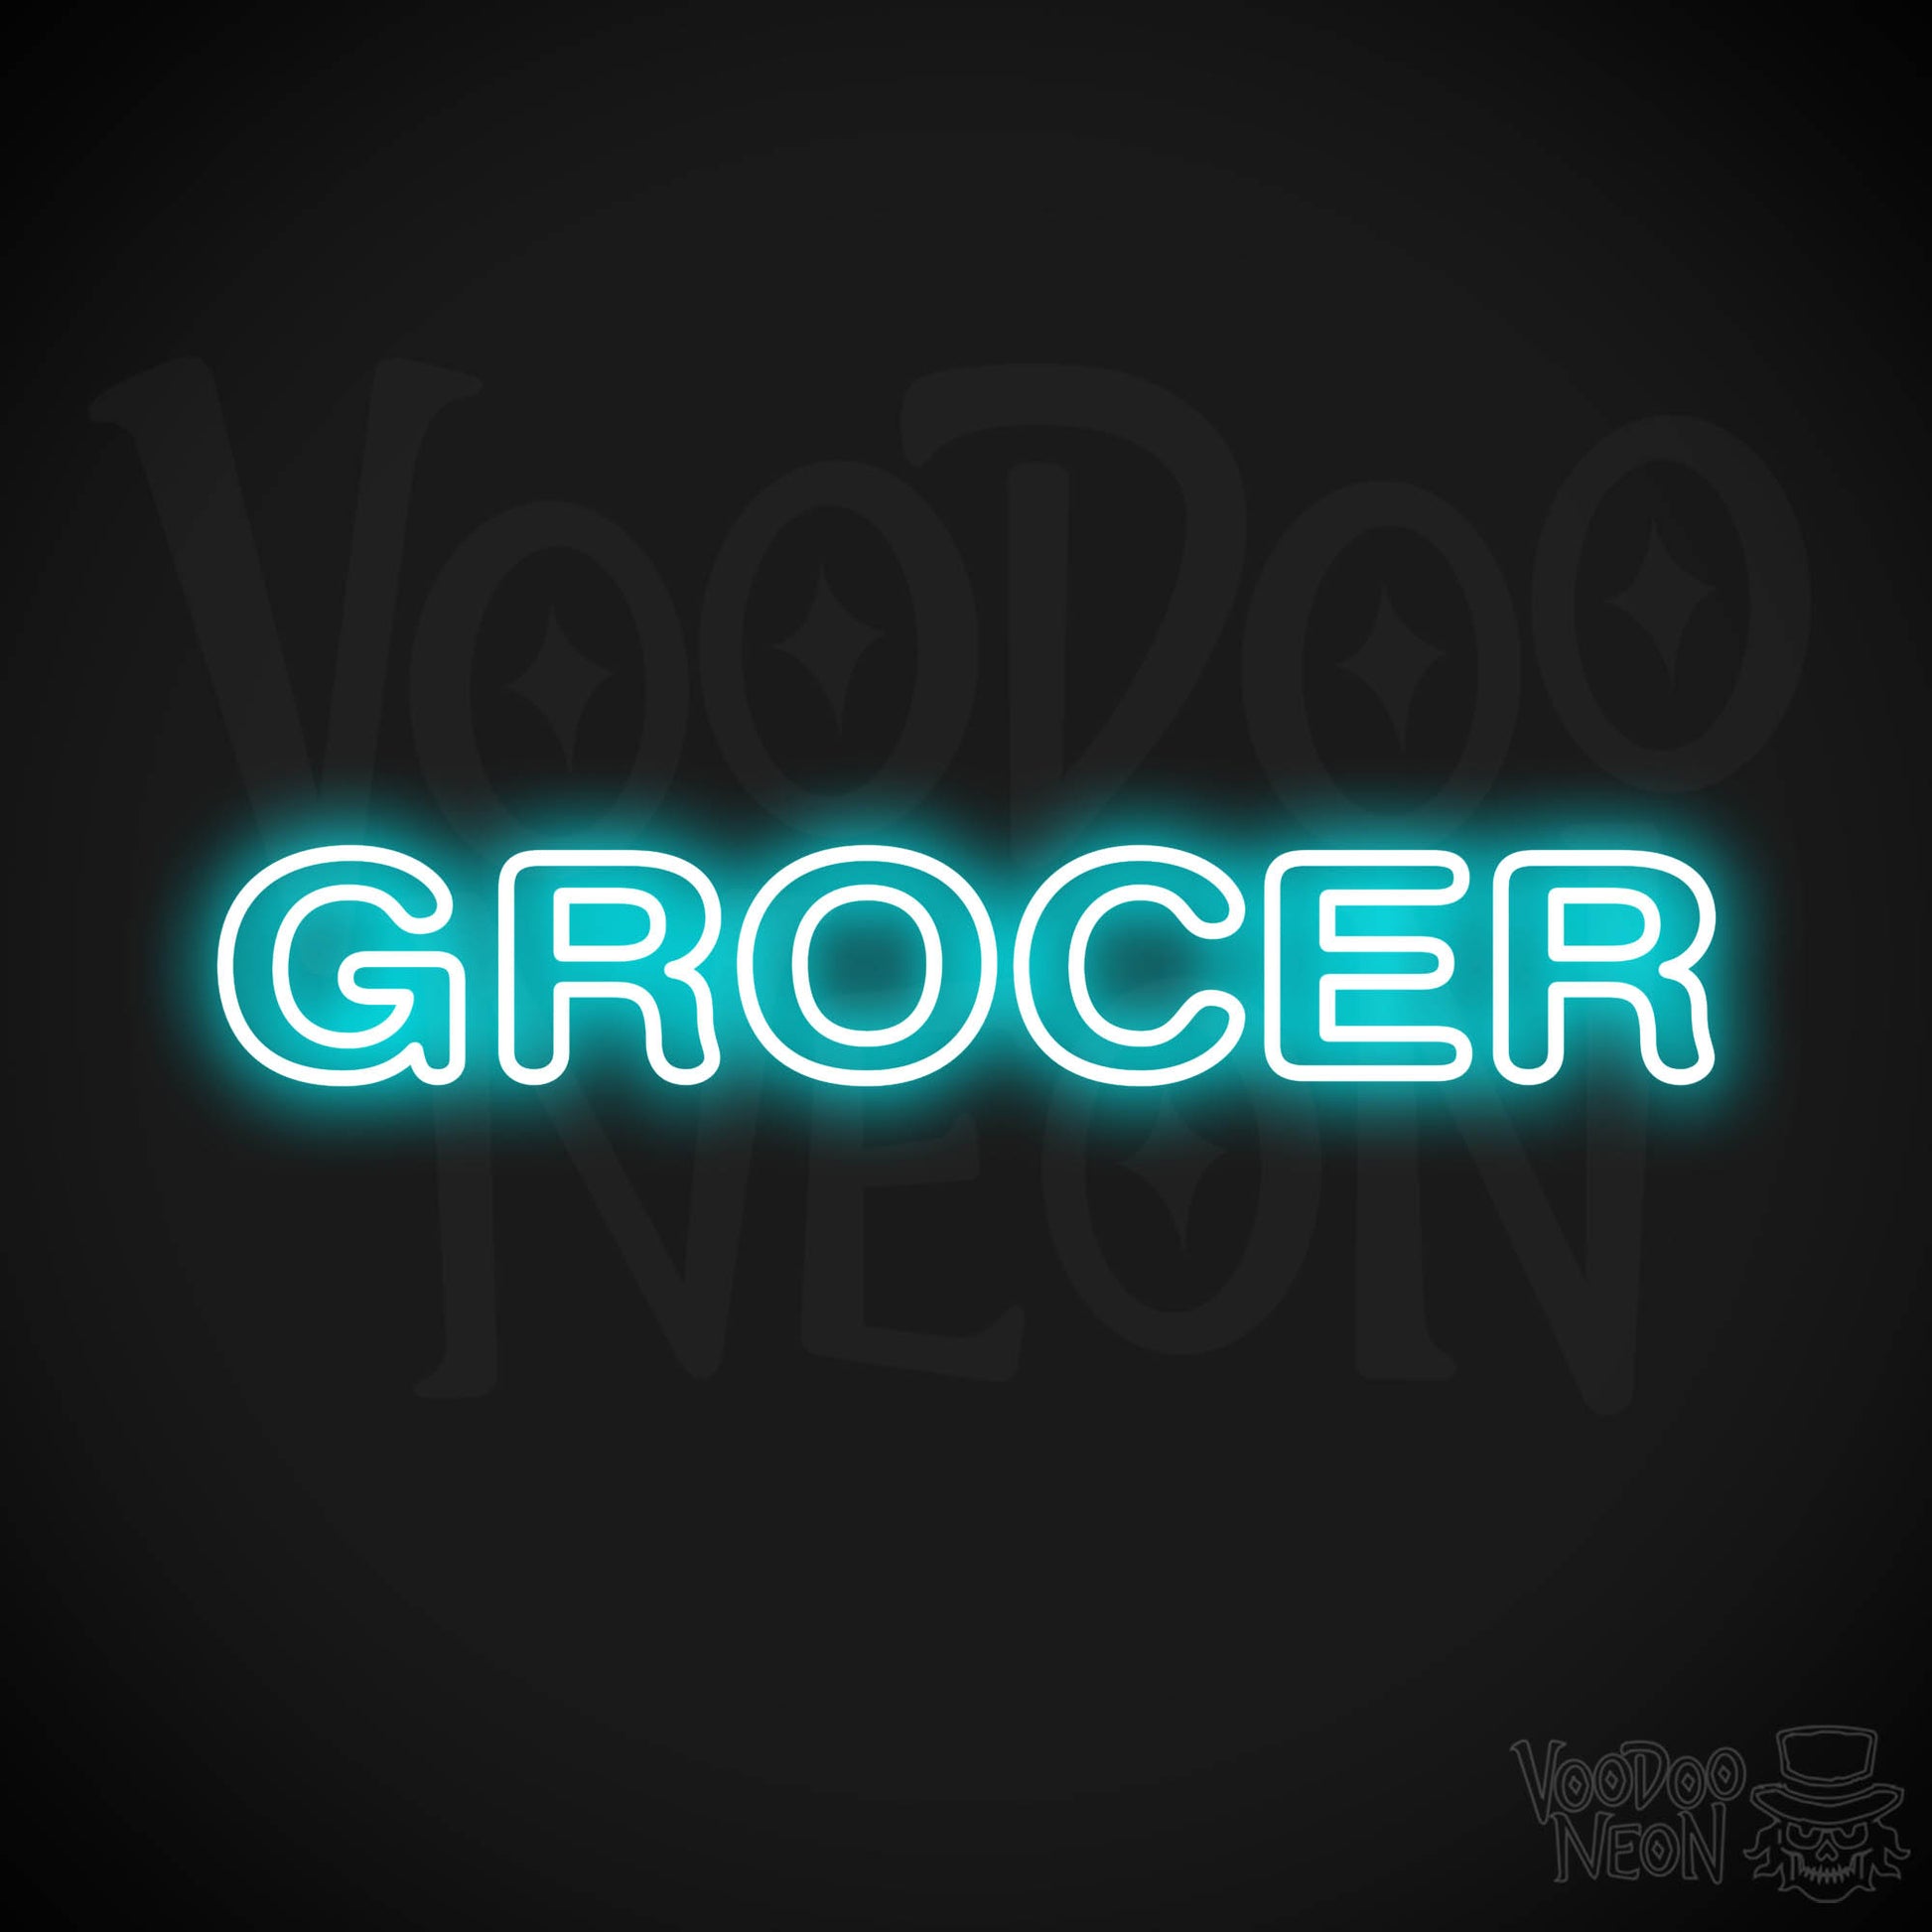 Grocer LED Neon - Ice Blue